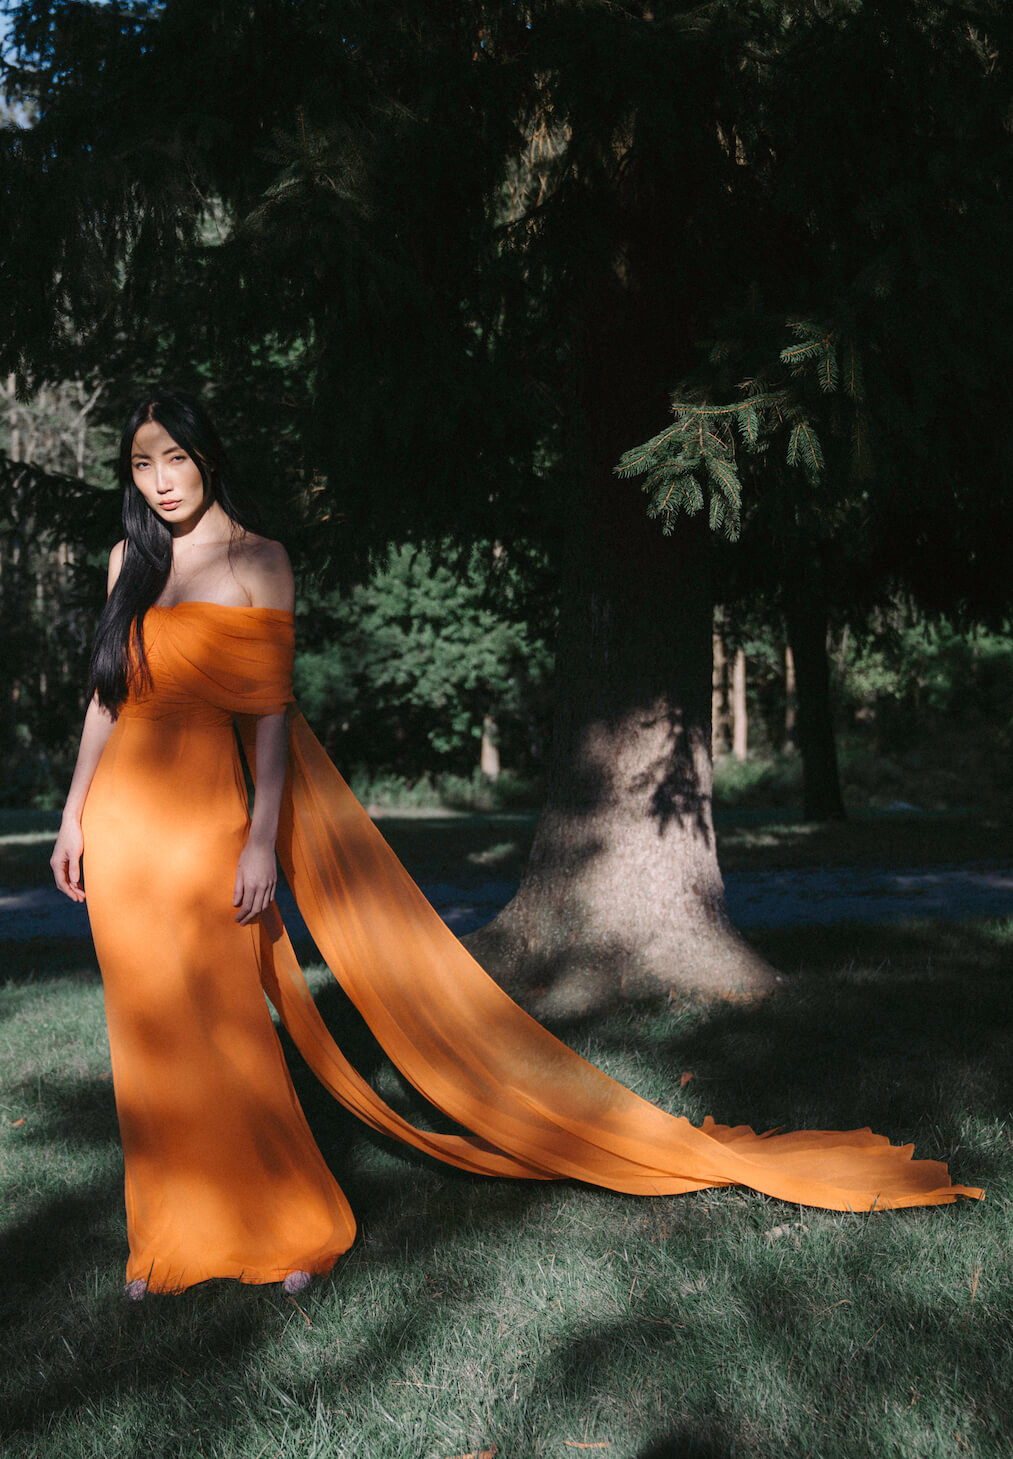 Anthea Tangerine Off-The-Shoulder Gown